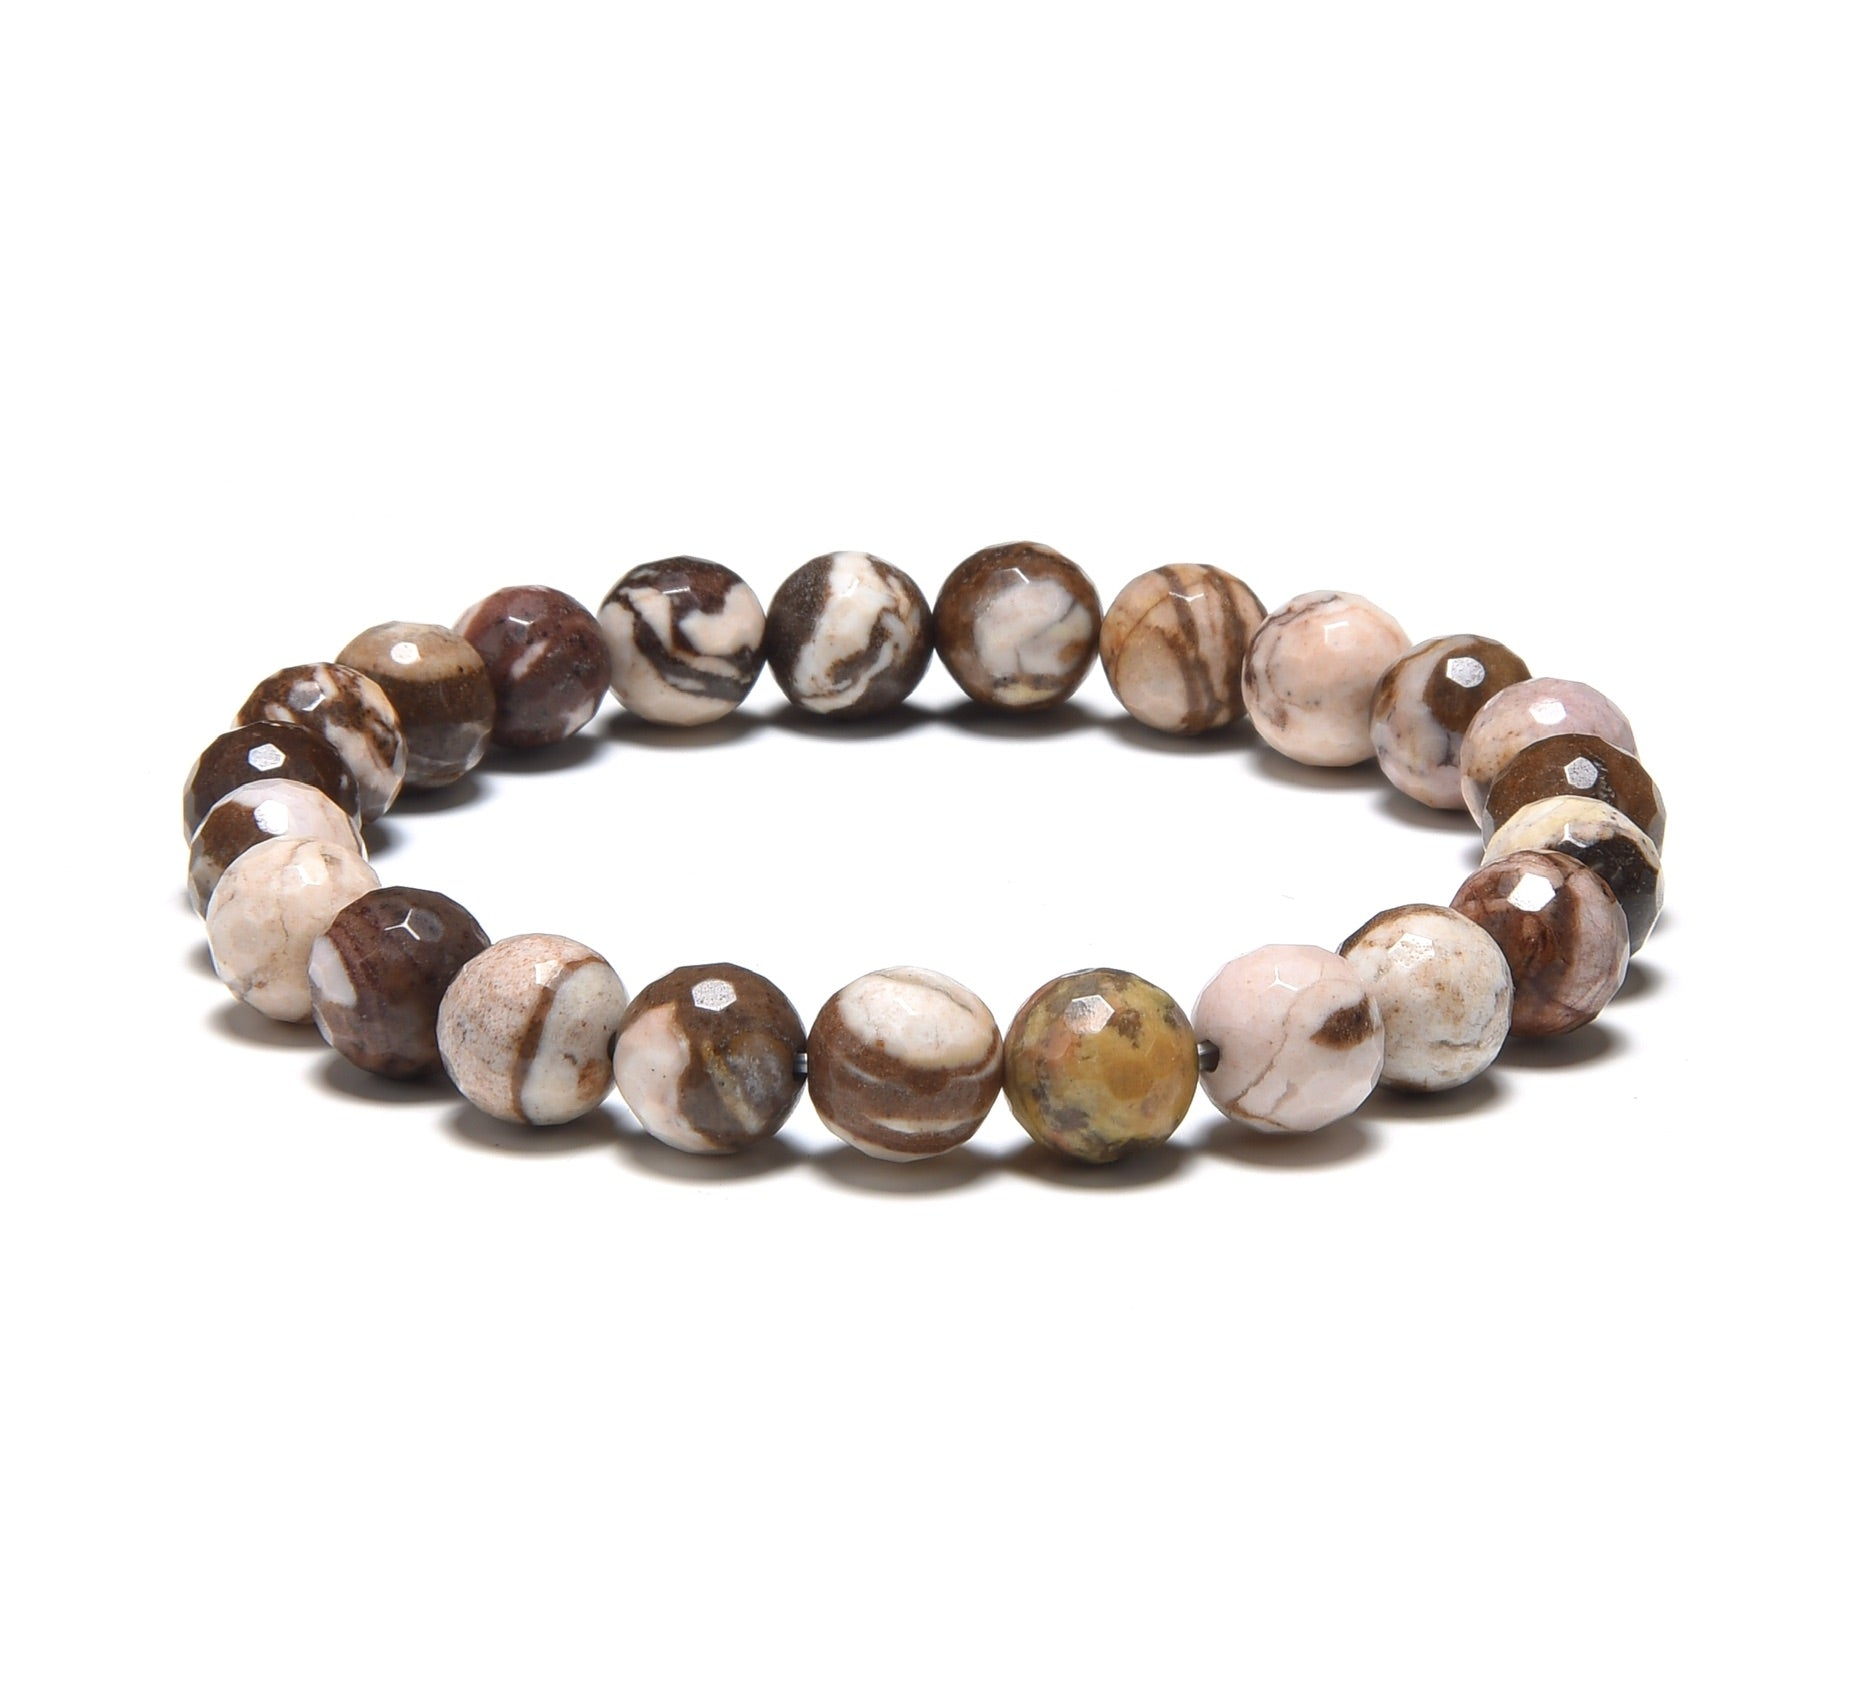 Libra Zodiac Bracelet: White Gold Letter Beads with Sunstone and tigers eye  stone beads